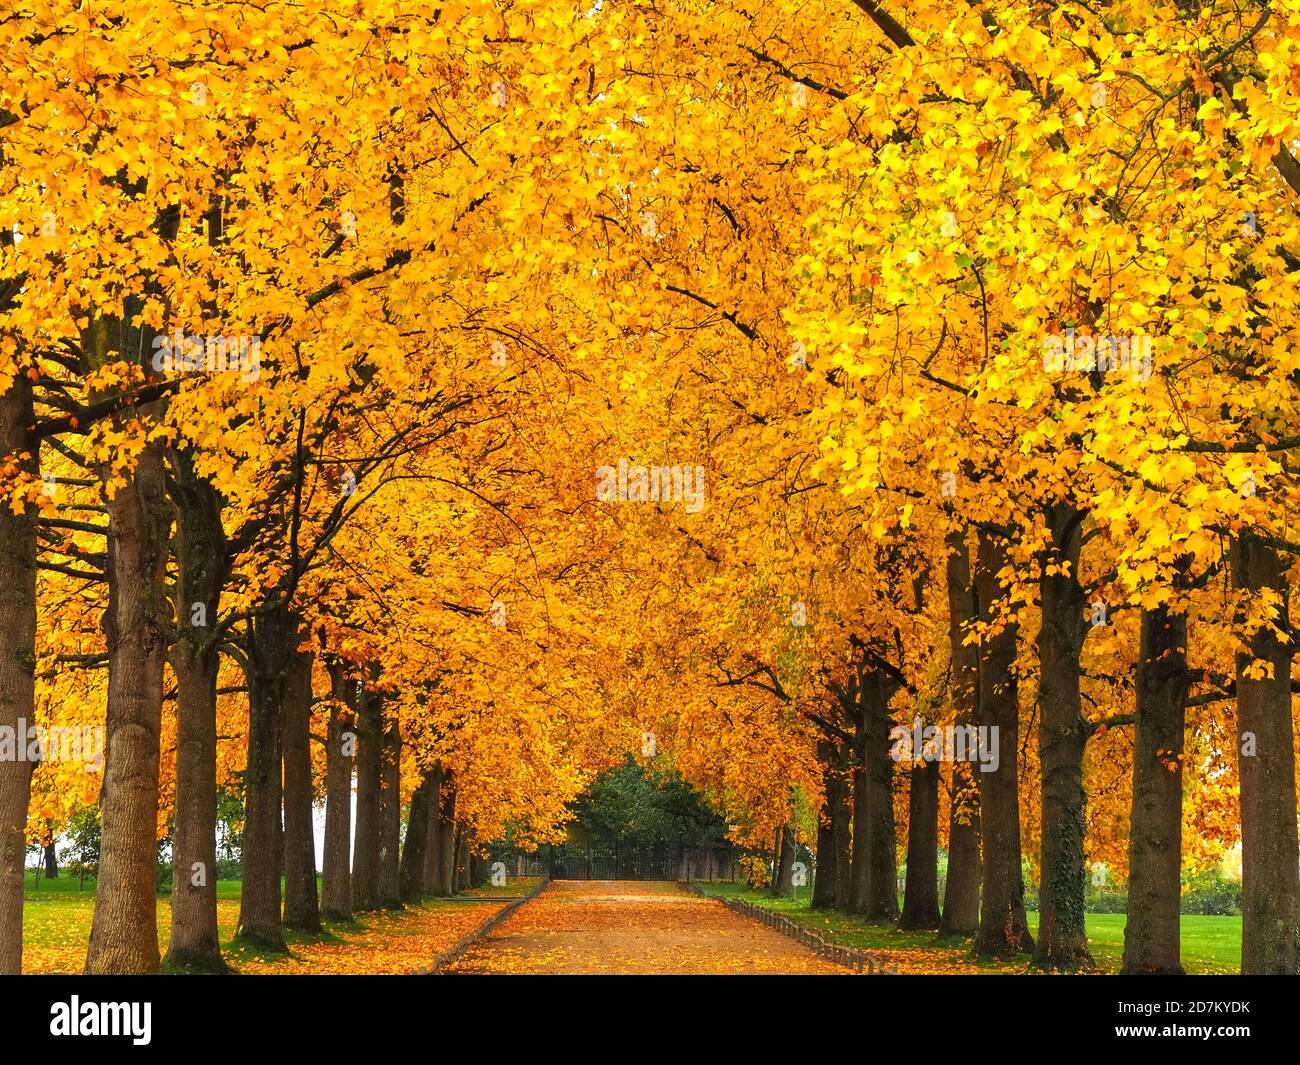 Avenue with yellow trees in autumn Stock Photo